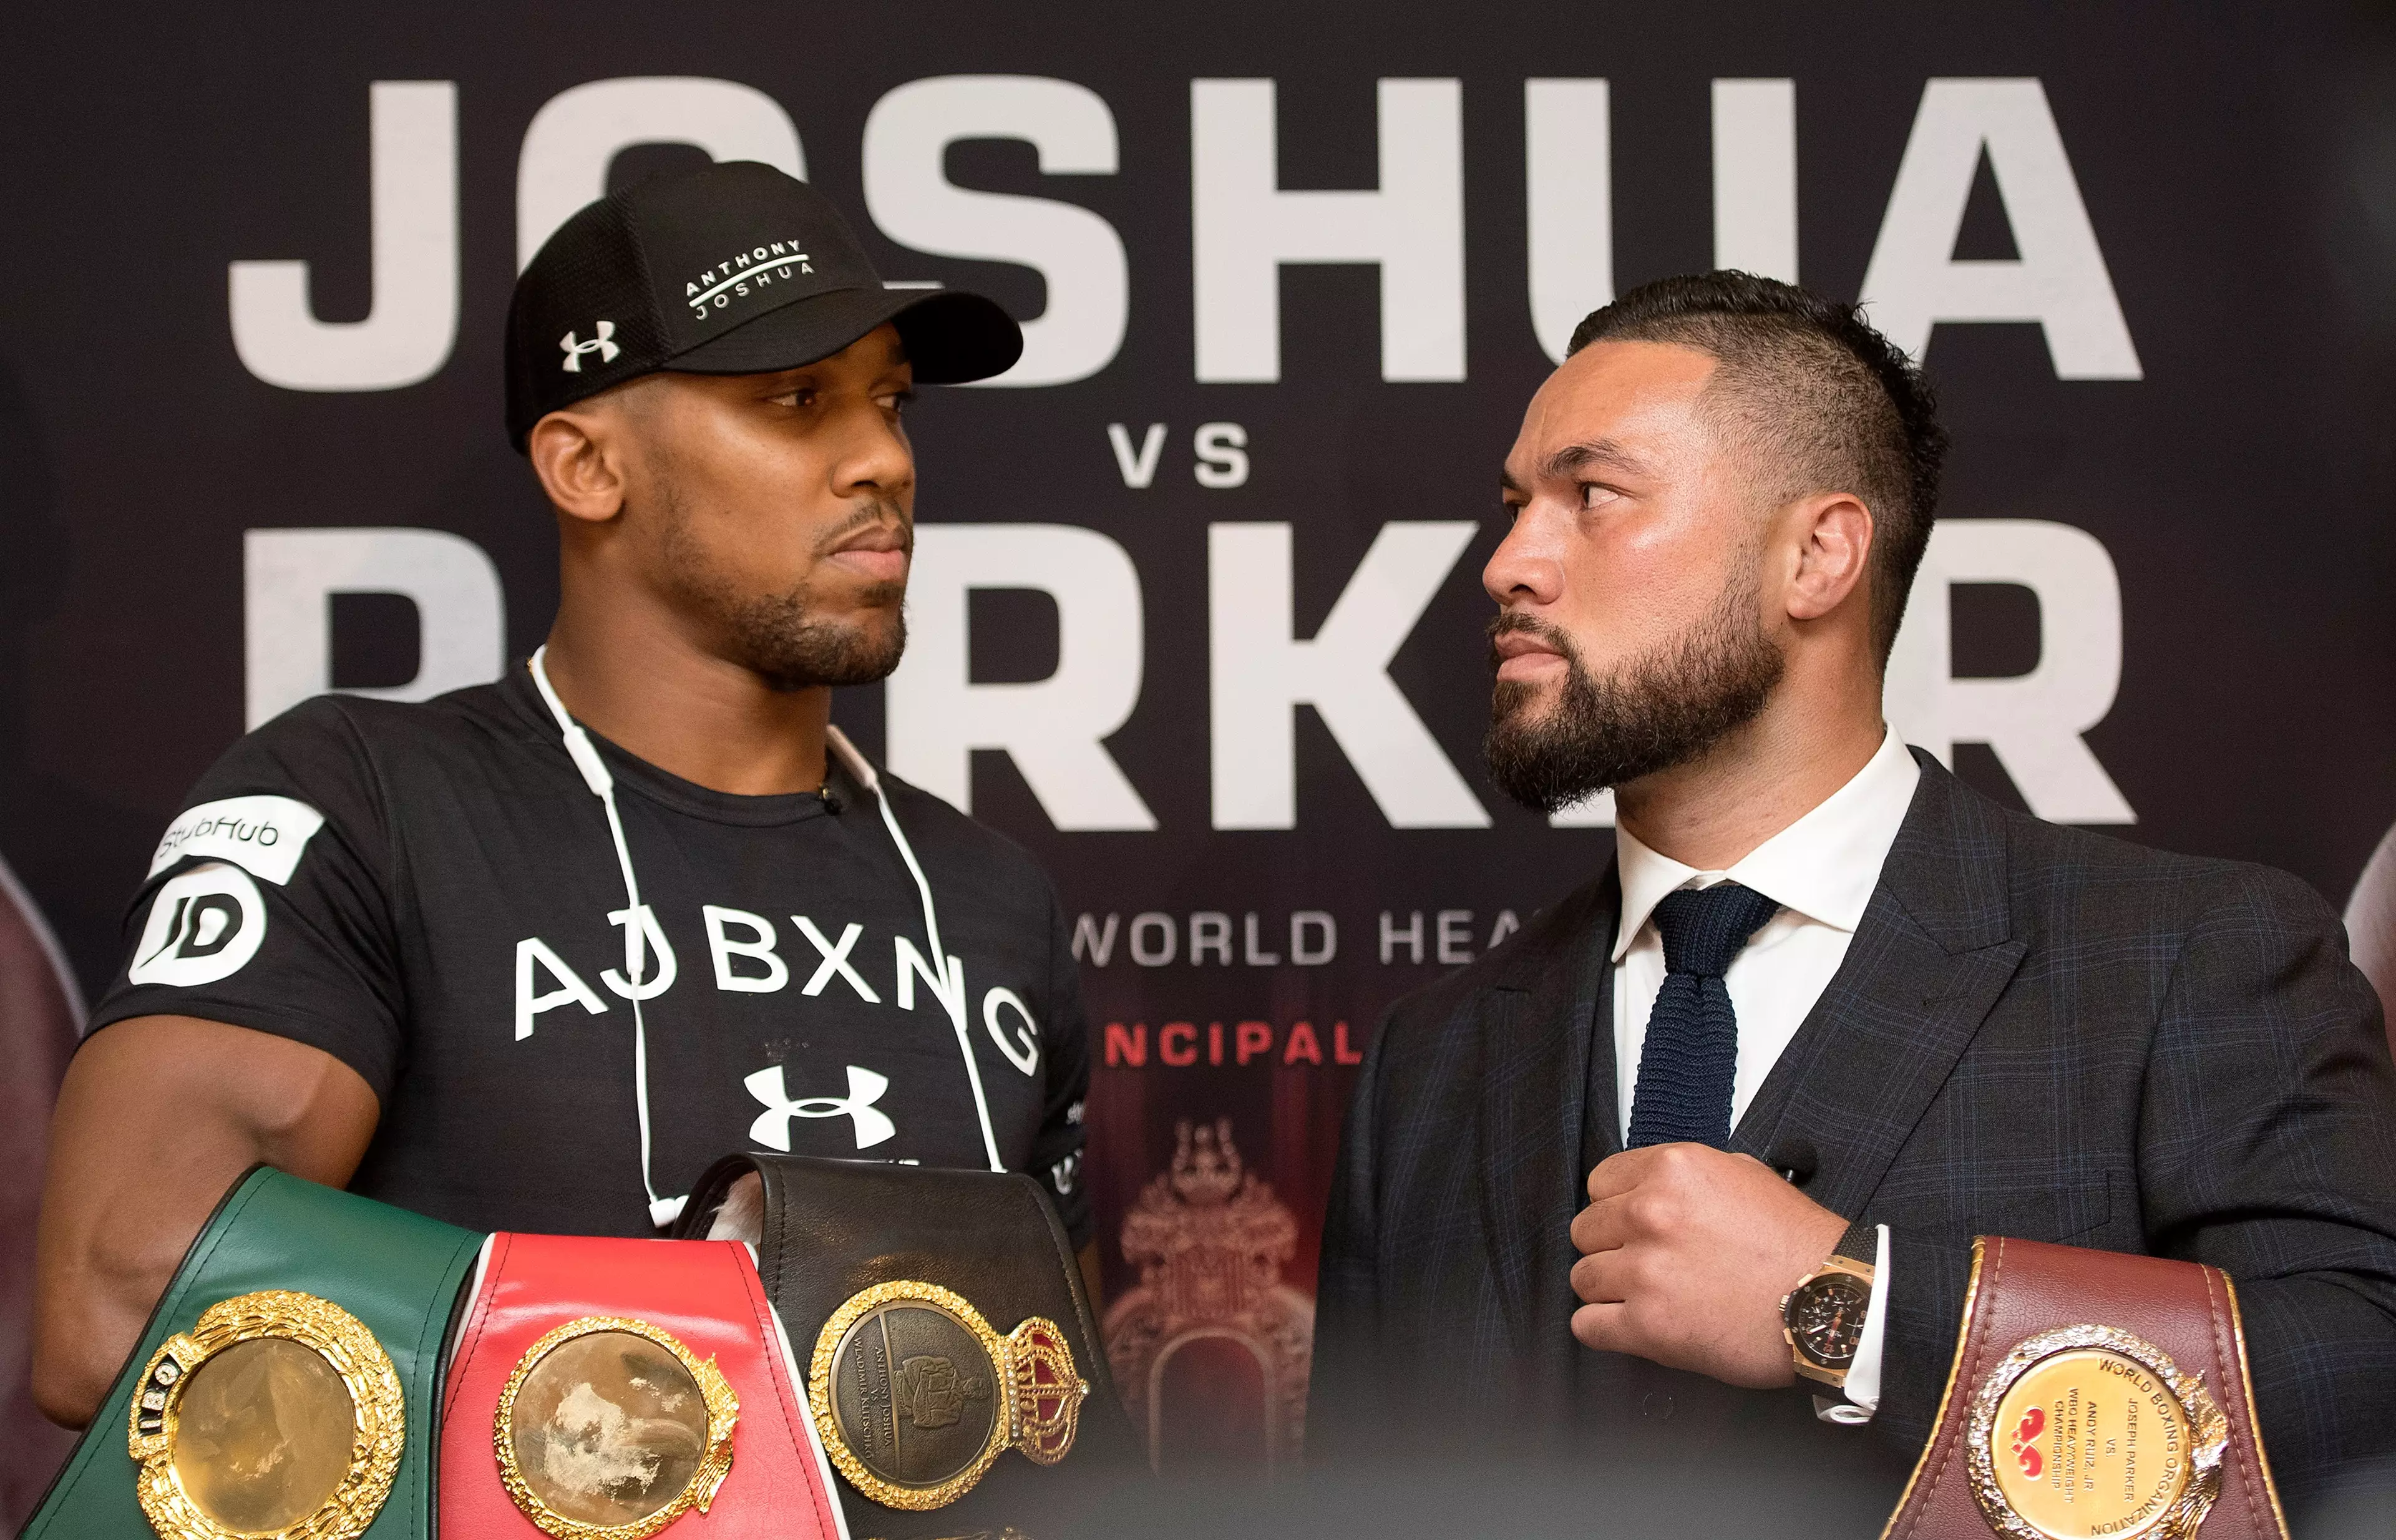 Joshua faces off against his opponent Parker. Image: PA